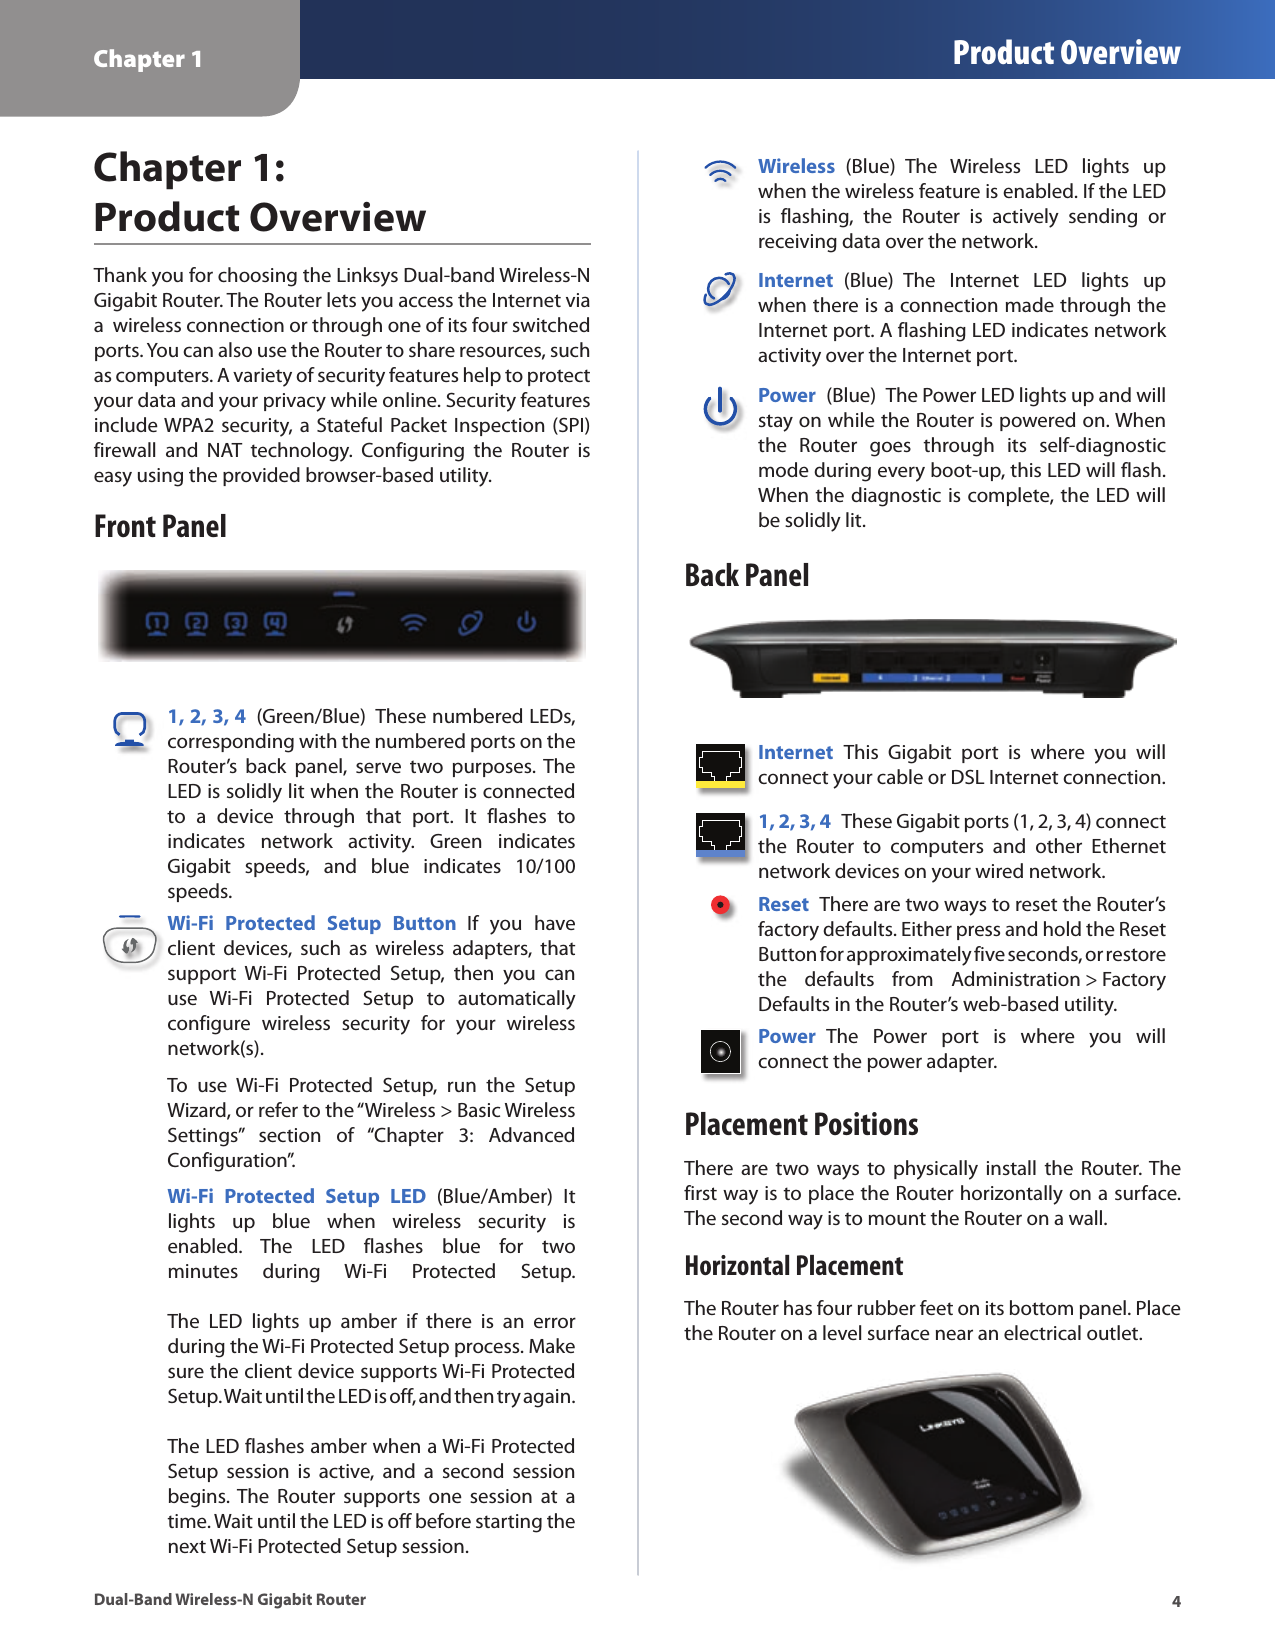 Chapter 1 Product Overview4Dual-Band Wireless-N Gigabit RouterChapter 1:  Product OverviewThank you for choosing the Linksys Dual-band Wireless-N Gigabit Router. The Router lets you access the Internet via a  wireless connection or through one of its four switched ports. You can also use the Router to share resources, such as computers. A variety of security features help to protect your data and your privacy while online. Security features include WPA2 security, a Stateful Packet Inspection (SPI) firewall  and  NAT  technology.  Configuring  the  Router  is easy using the provided browser-based utility.Front Panel1, 2, 3, 4  (Green/Blue)  These numbered LEDs, corresponding with the numbered ports on the Router’s  back  panel,  serve  two  purposes.  The LED is solidly lit when the Router is connected to  a  device  through  that  port.  It  flashes  to indicates  network  activity.  Green  indicates Gigabit  speeds,  and  blue  indicates  10/100 speeds.Wi-Fi  Protected  Setup  Button  If  you  have client  devices,  such  as  wireless  adapters,  that support  Wi-Fi  Protected  Setup,  then  you  can use  Wi-Fi  Protected  Setup  to  automatically configure  wireless  security  for  your  wireless network(s).To  use  Wi-Fi  Protected  Setup,  run  the  Setup Wizard, or refer to the “Wireless &gt; Basic Wireless Settings”  section  of  “Chapter  3:  Advanced Configuration”.Wi-Fi  Protected  Setup  LED  (Blue/Amber)  It lights  up  blue  when  wireless  security  is enabled.  The  LED  flashes  blue  for  two minutes  during  Wi-Fi  Protected  Setup.    The  LED  lights  up  amber  if  there  is  an  error during the Wi-Fi Protected Setup process. Make sure the client device supports Wi-Fi Protected Setup. Wait until the LED is off, and then try again.   The LED flashes amber when a Wi-Fi Protected Setup  session  is  active,  and  a  second  session begins. The  Router  supports  one  session  at  a time. Wait until the LED is off before starting the next Wi-Fi Protected Setup session.Wireless  (Blue)  The  Wireless  LED  lights  up when the wireless feature is enabled. If the LED is  flashing,  the  Router  is  actively  sending  or receiving data over the network.Internet  (Blue)  The  Internet  LED  lights  up when there is a connection made through the Internet port. A flashing LED indicates network activity over the Internet port.Power  (Blue)  The Power LED lights up and will stay on while the Router is powered on. When the  Router  goes  through  its  self-diagnostic mode during every boot-up, this LED will flash. When the diagnostic is complete, the LED will be solidly lit.Back PanelInternet  This  Gigabit  port  is  where  you  will connect your cable or DSL Internet connection. 1, 2, 3, 4  These Gigabit ports (1, 2, 3, 4) connect the  Router  to  computers  and  other  Ethernet network devices on your wired network. Reset  There are two ways to reset the Router’s factory defaults. Either press and hold the Reset Button for approximately five seconds, or restore the  defaults  from  Administration &gt; Factory Defaults in the Router’s web-based utility. Power  The  Power  port  is  where  you  will  connect the power adapter.Placement PositionsThere are  two  ways  to  physically  install  the Router. The first way is to place the Router horizontally on a surface. The second way is to mount the Router on a wall.Horizontal PlacementThe Router has four rubber feet on its bottom panel. Place the Router on a level surface near an electrical outlet.